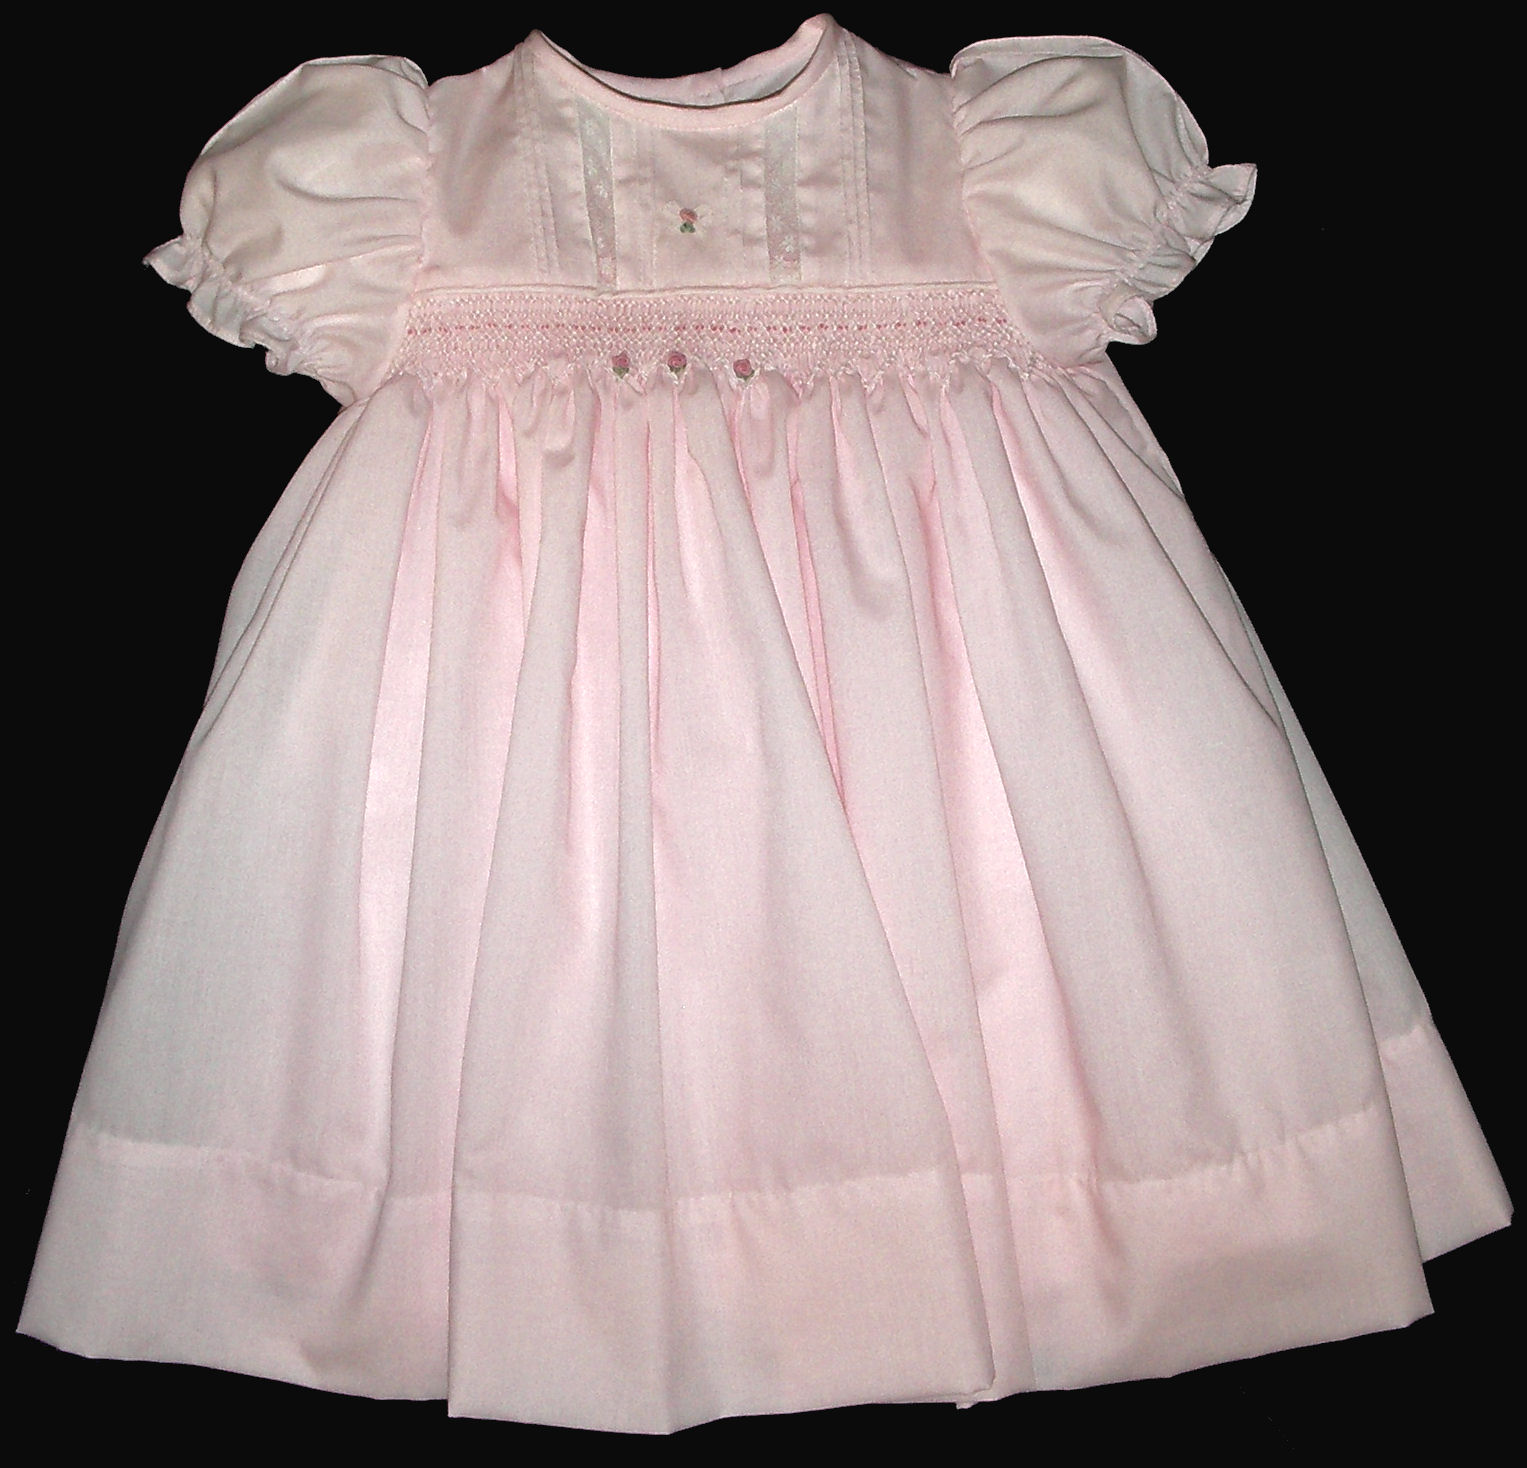 Hand Smocked with fine pintucks, lace, bows and roses, Dress - Sarah_ FREE Shipping Sz 3M to 18M